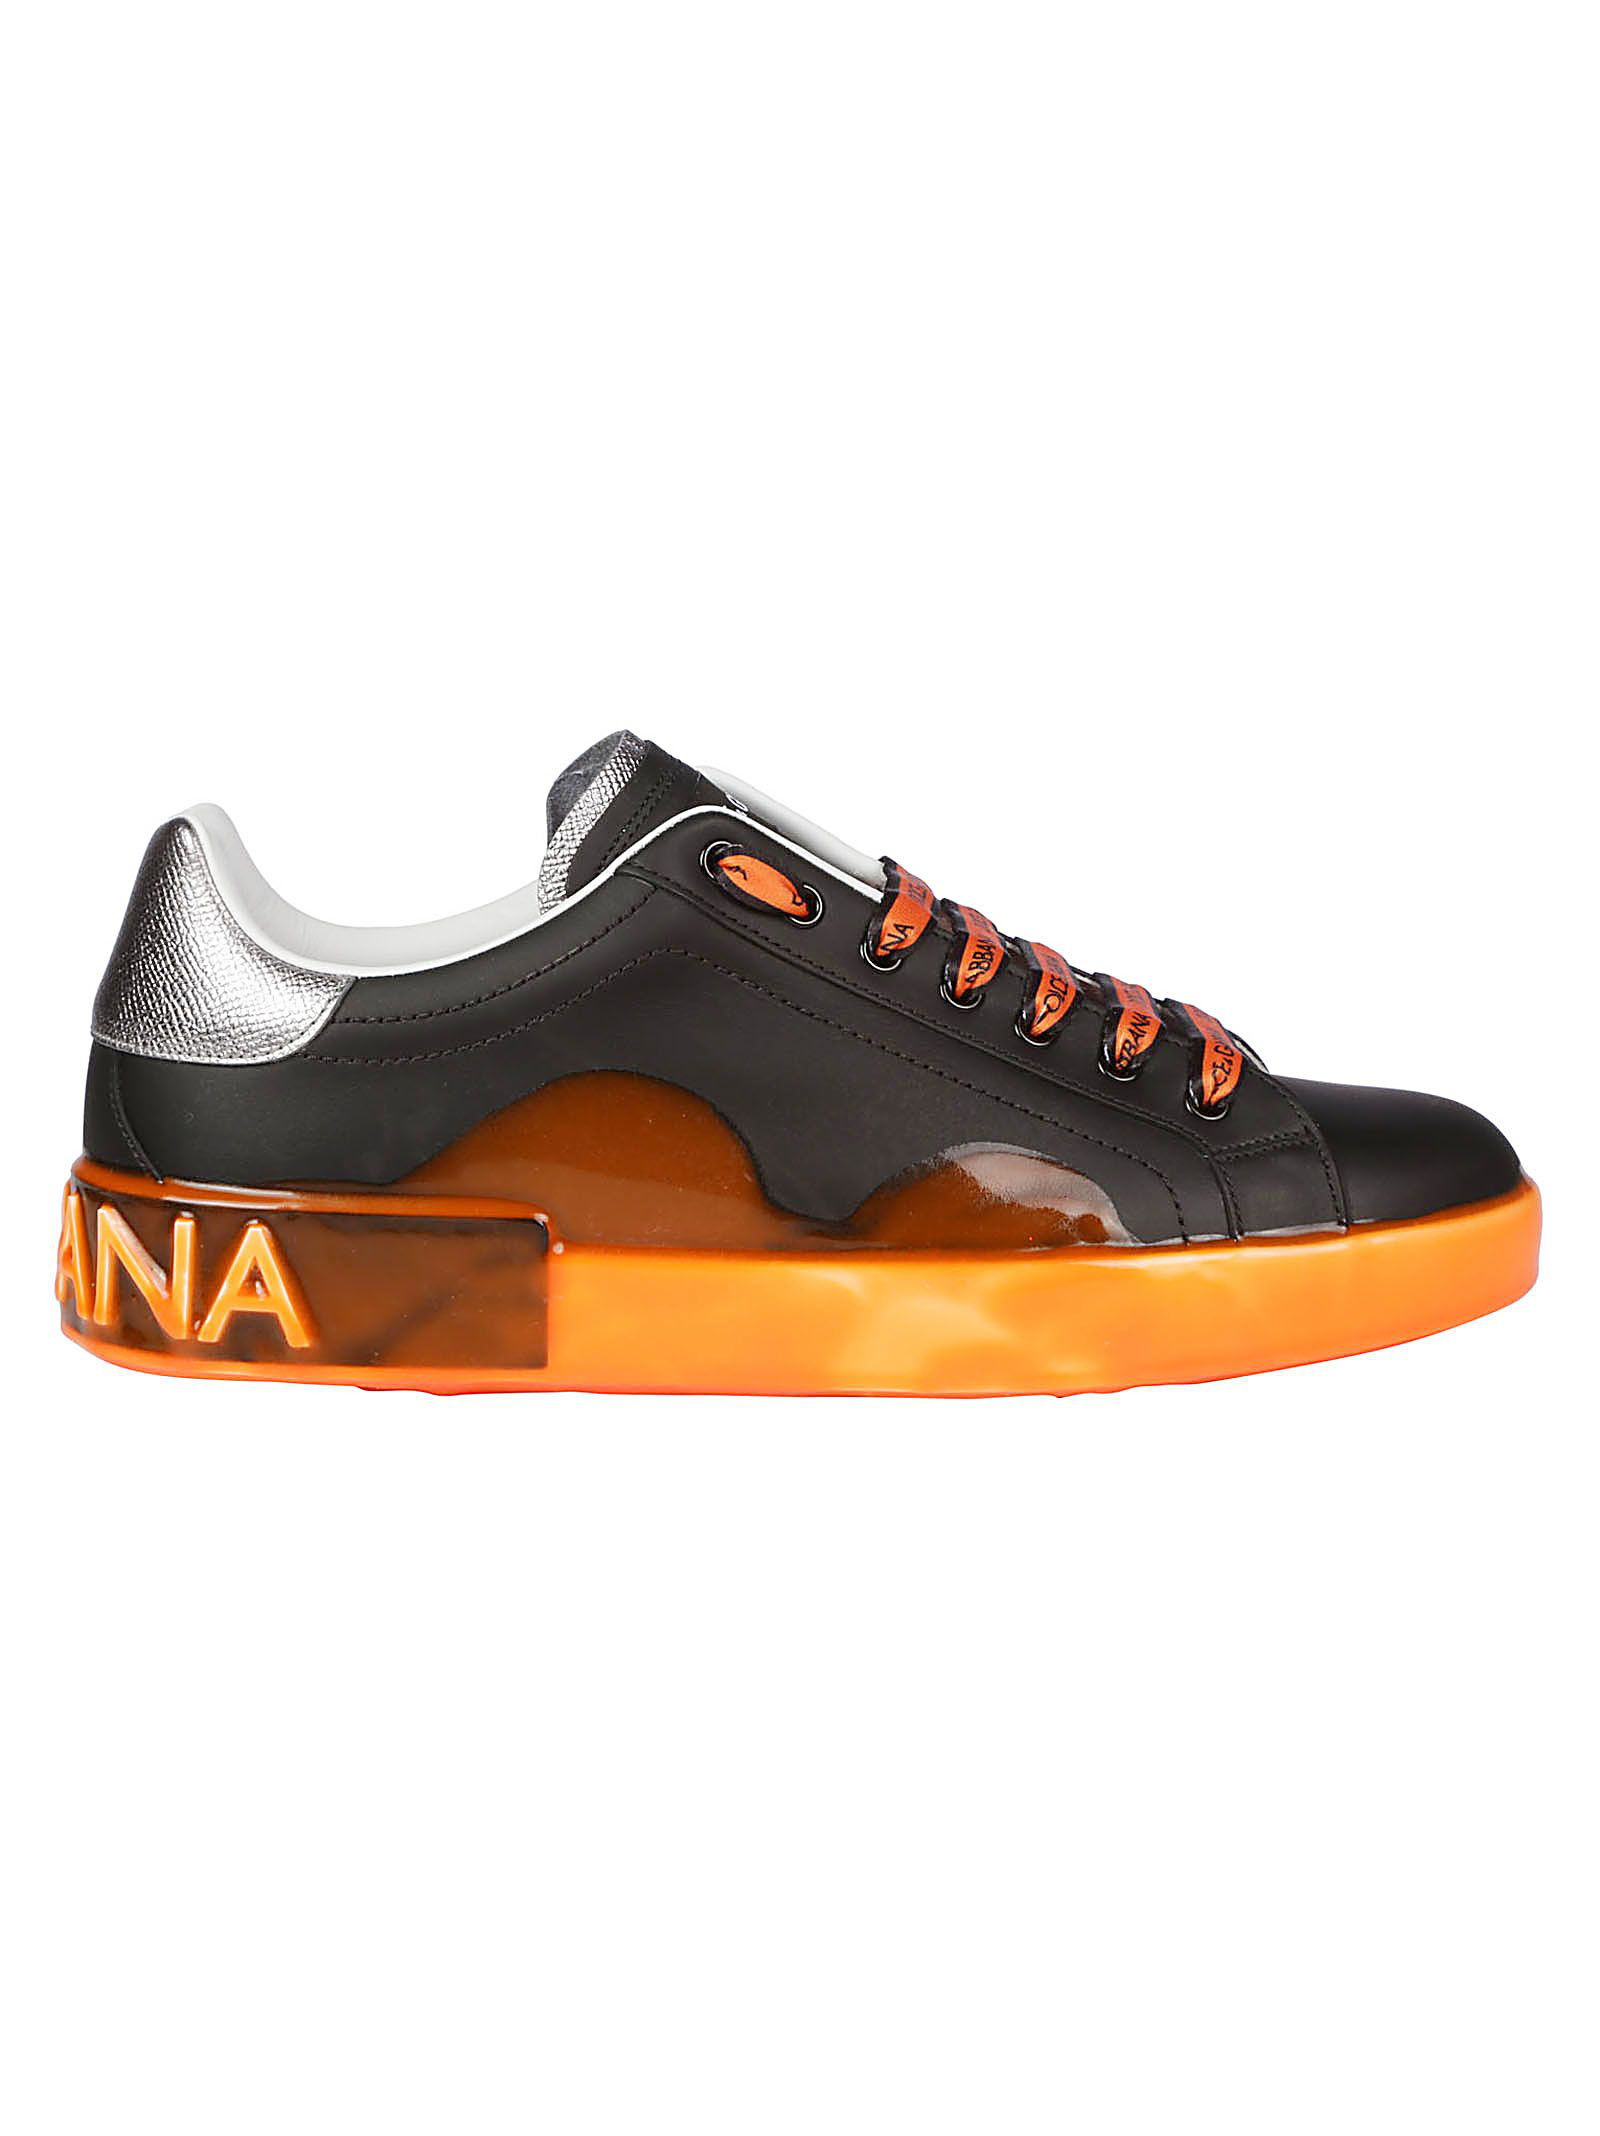 orange dolce and gabbana sneakers